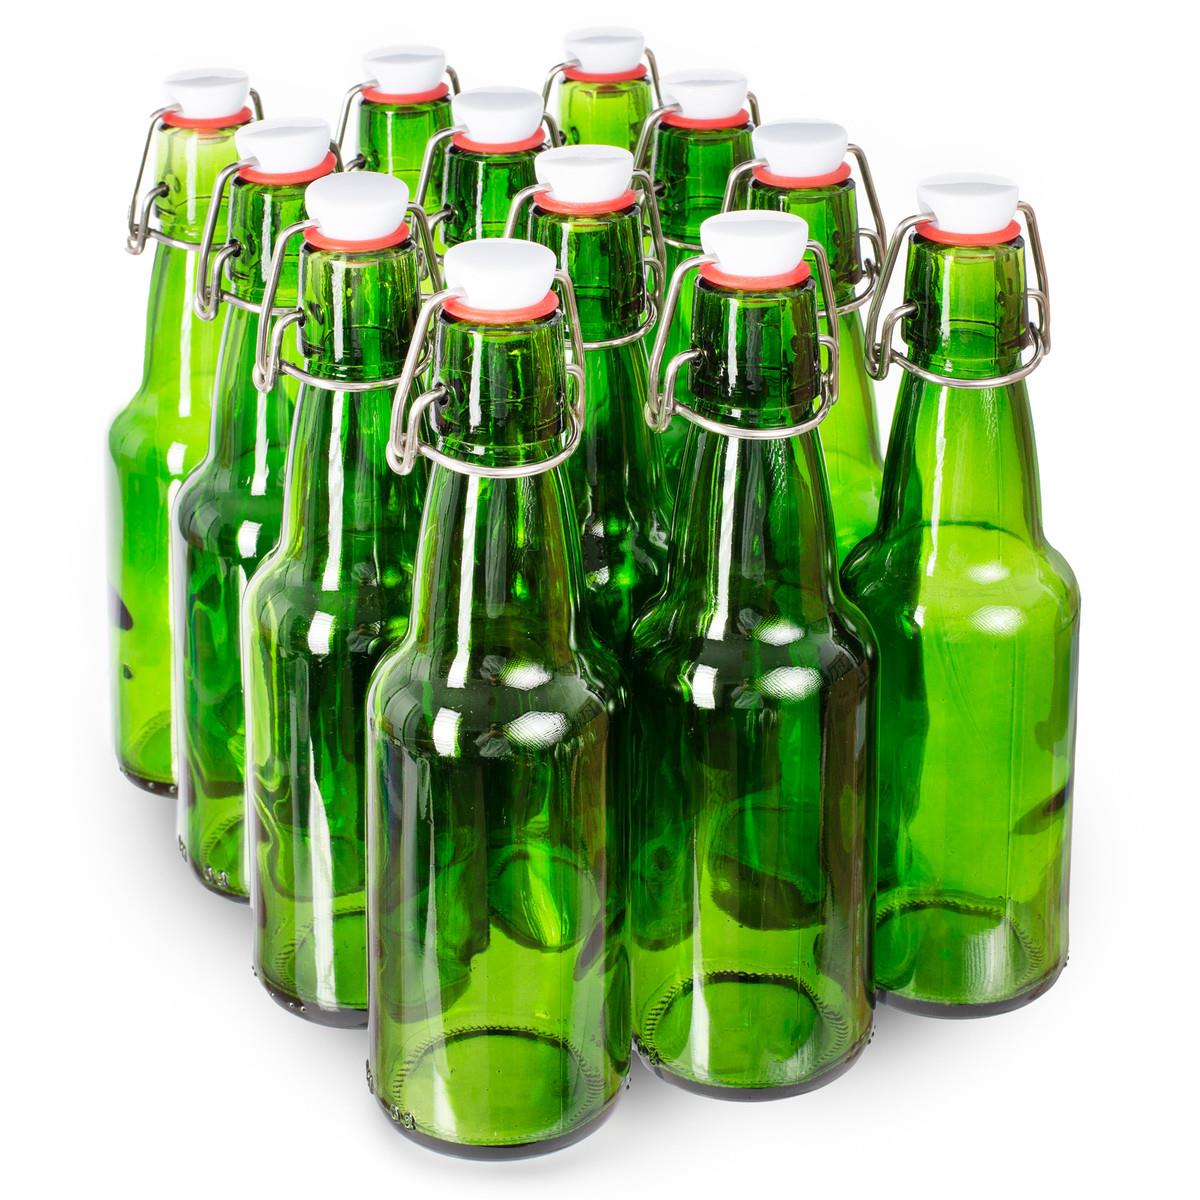 Picture of Brybelly KBOT-113 330 ml Grolsch Bottle, Green - Pack of 12